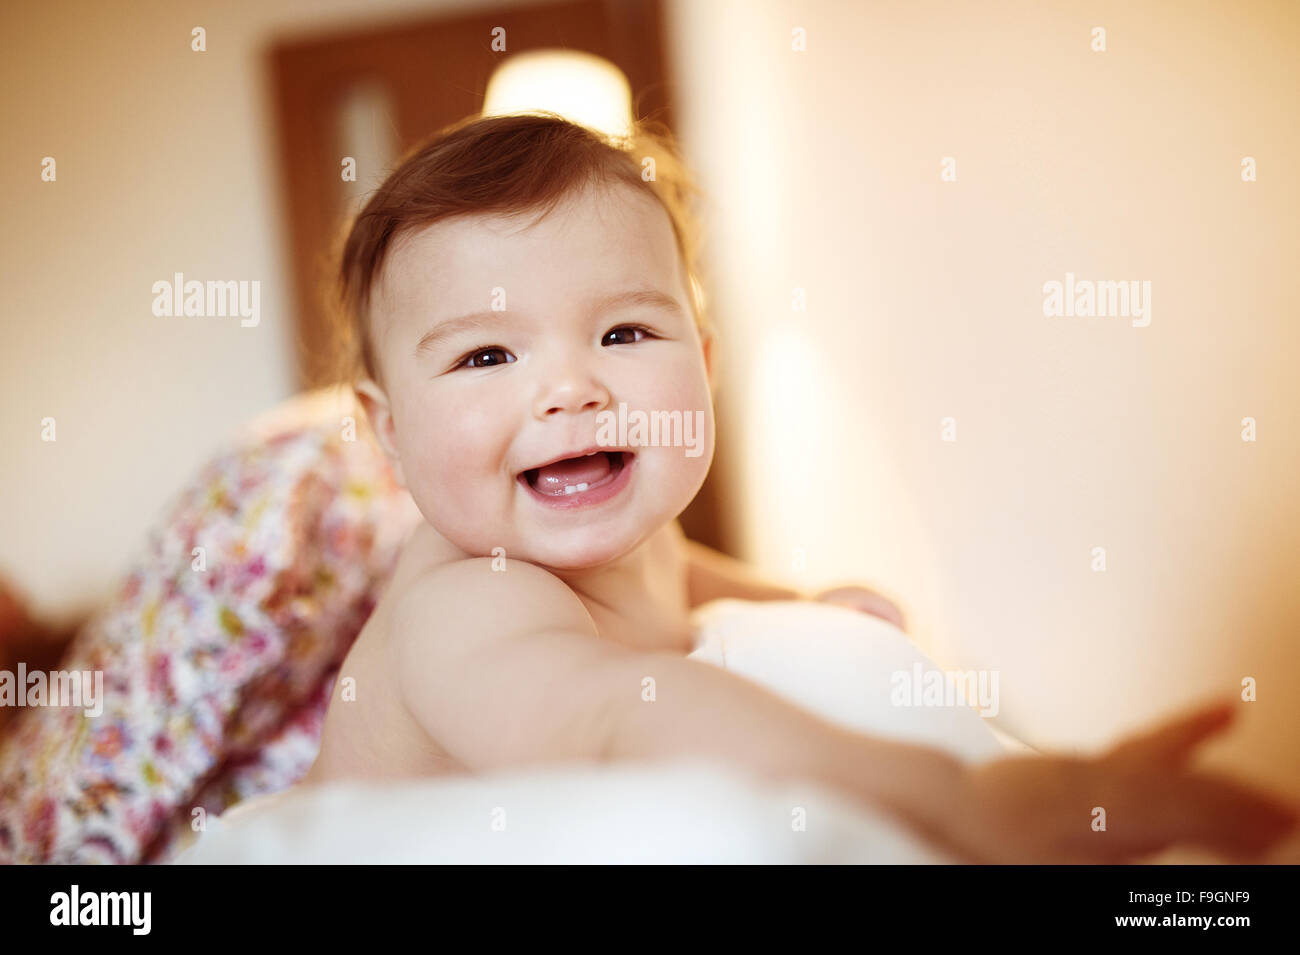 Cute little baby playing and having fun on a sofa Stock Photo